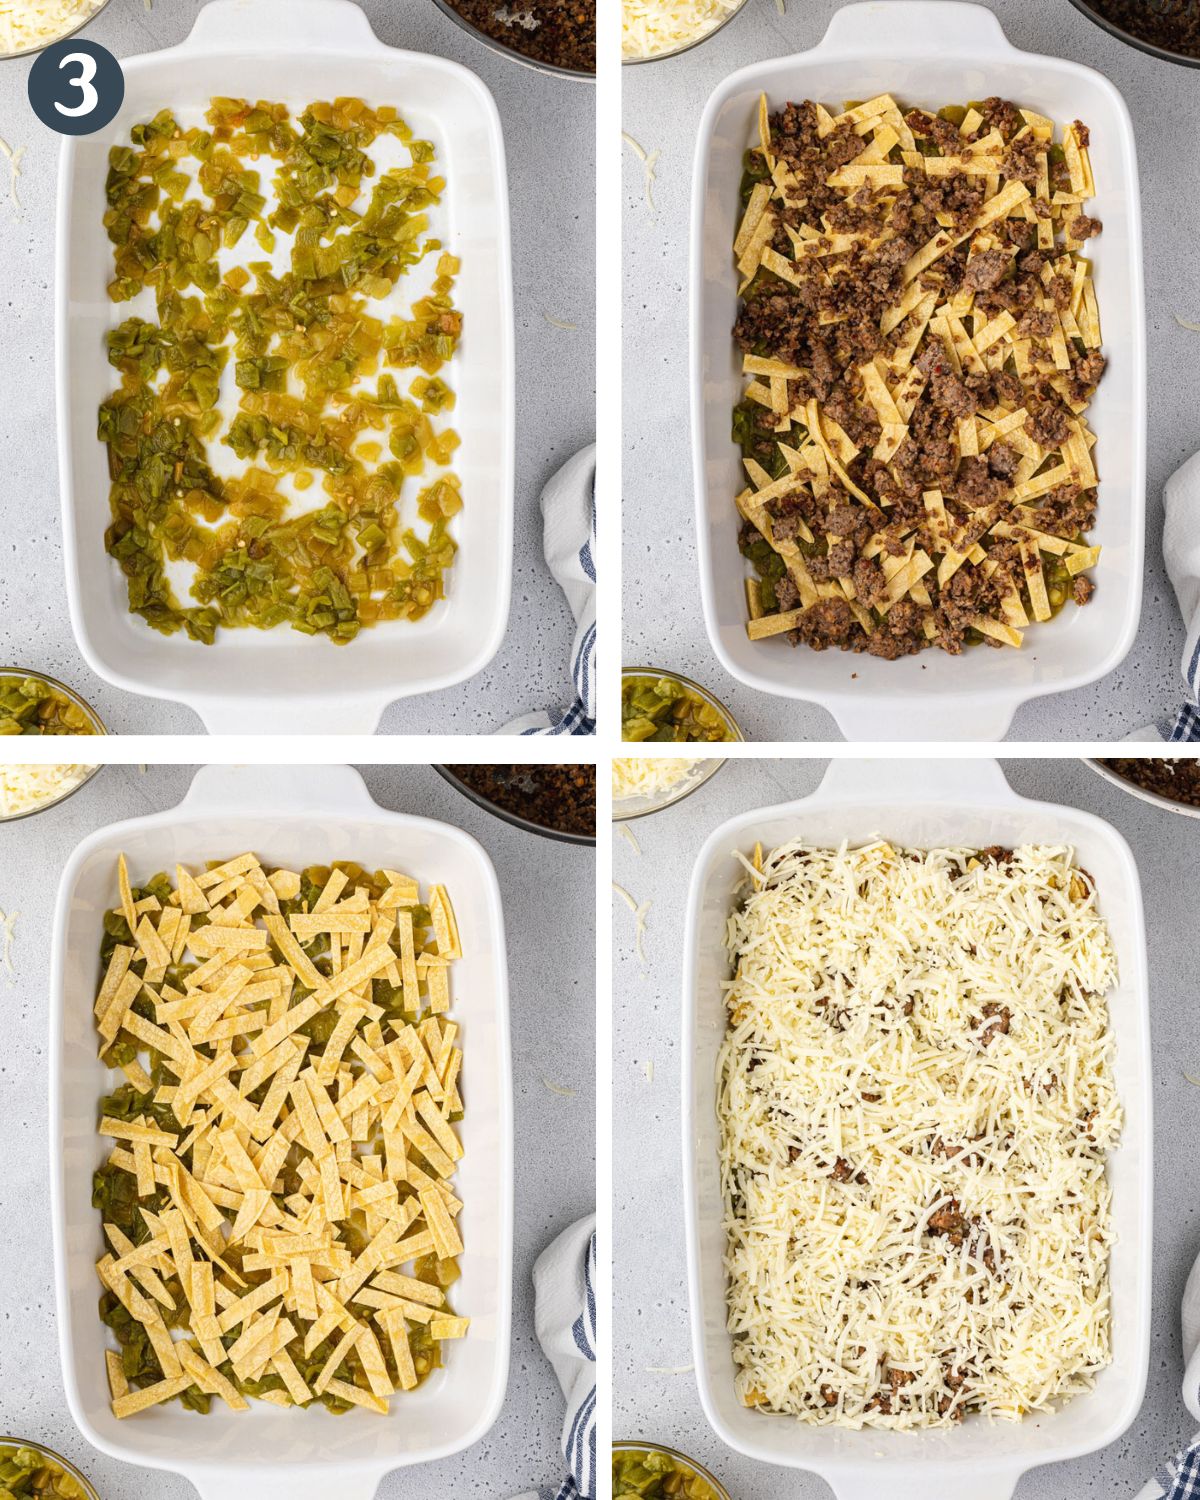 4 images showing the layers of the green chile egg casserole.